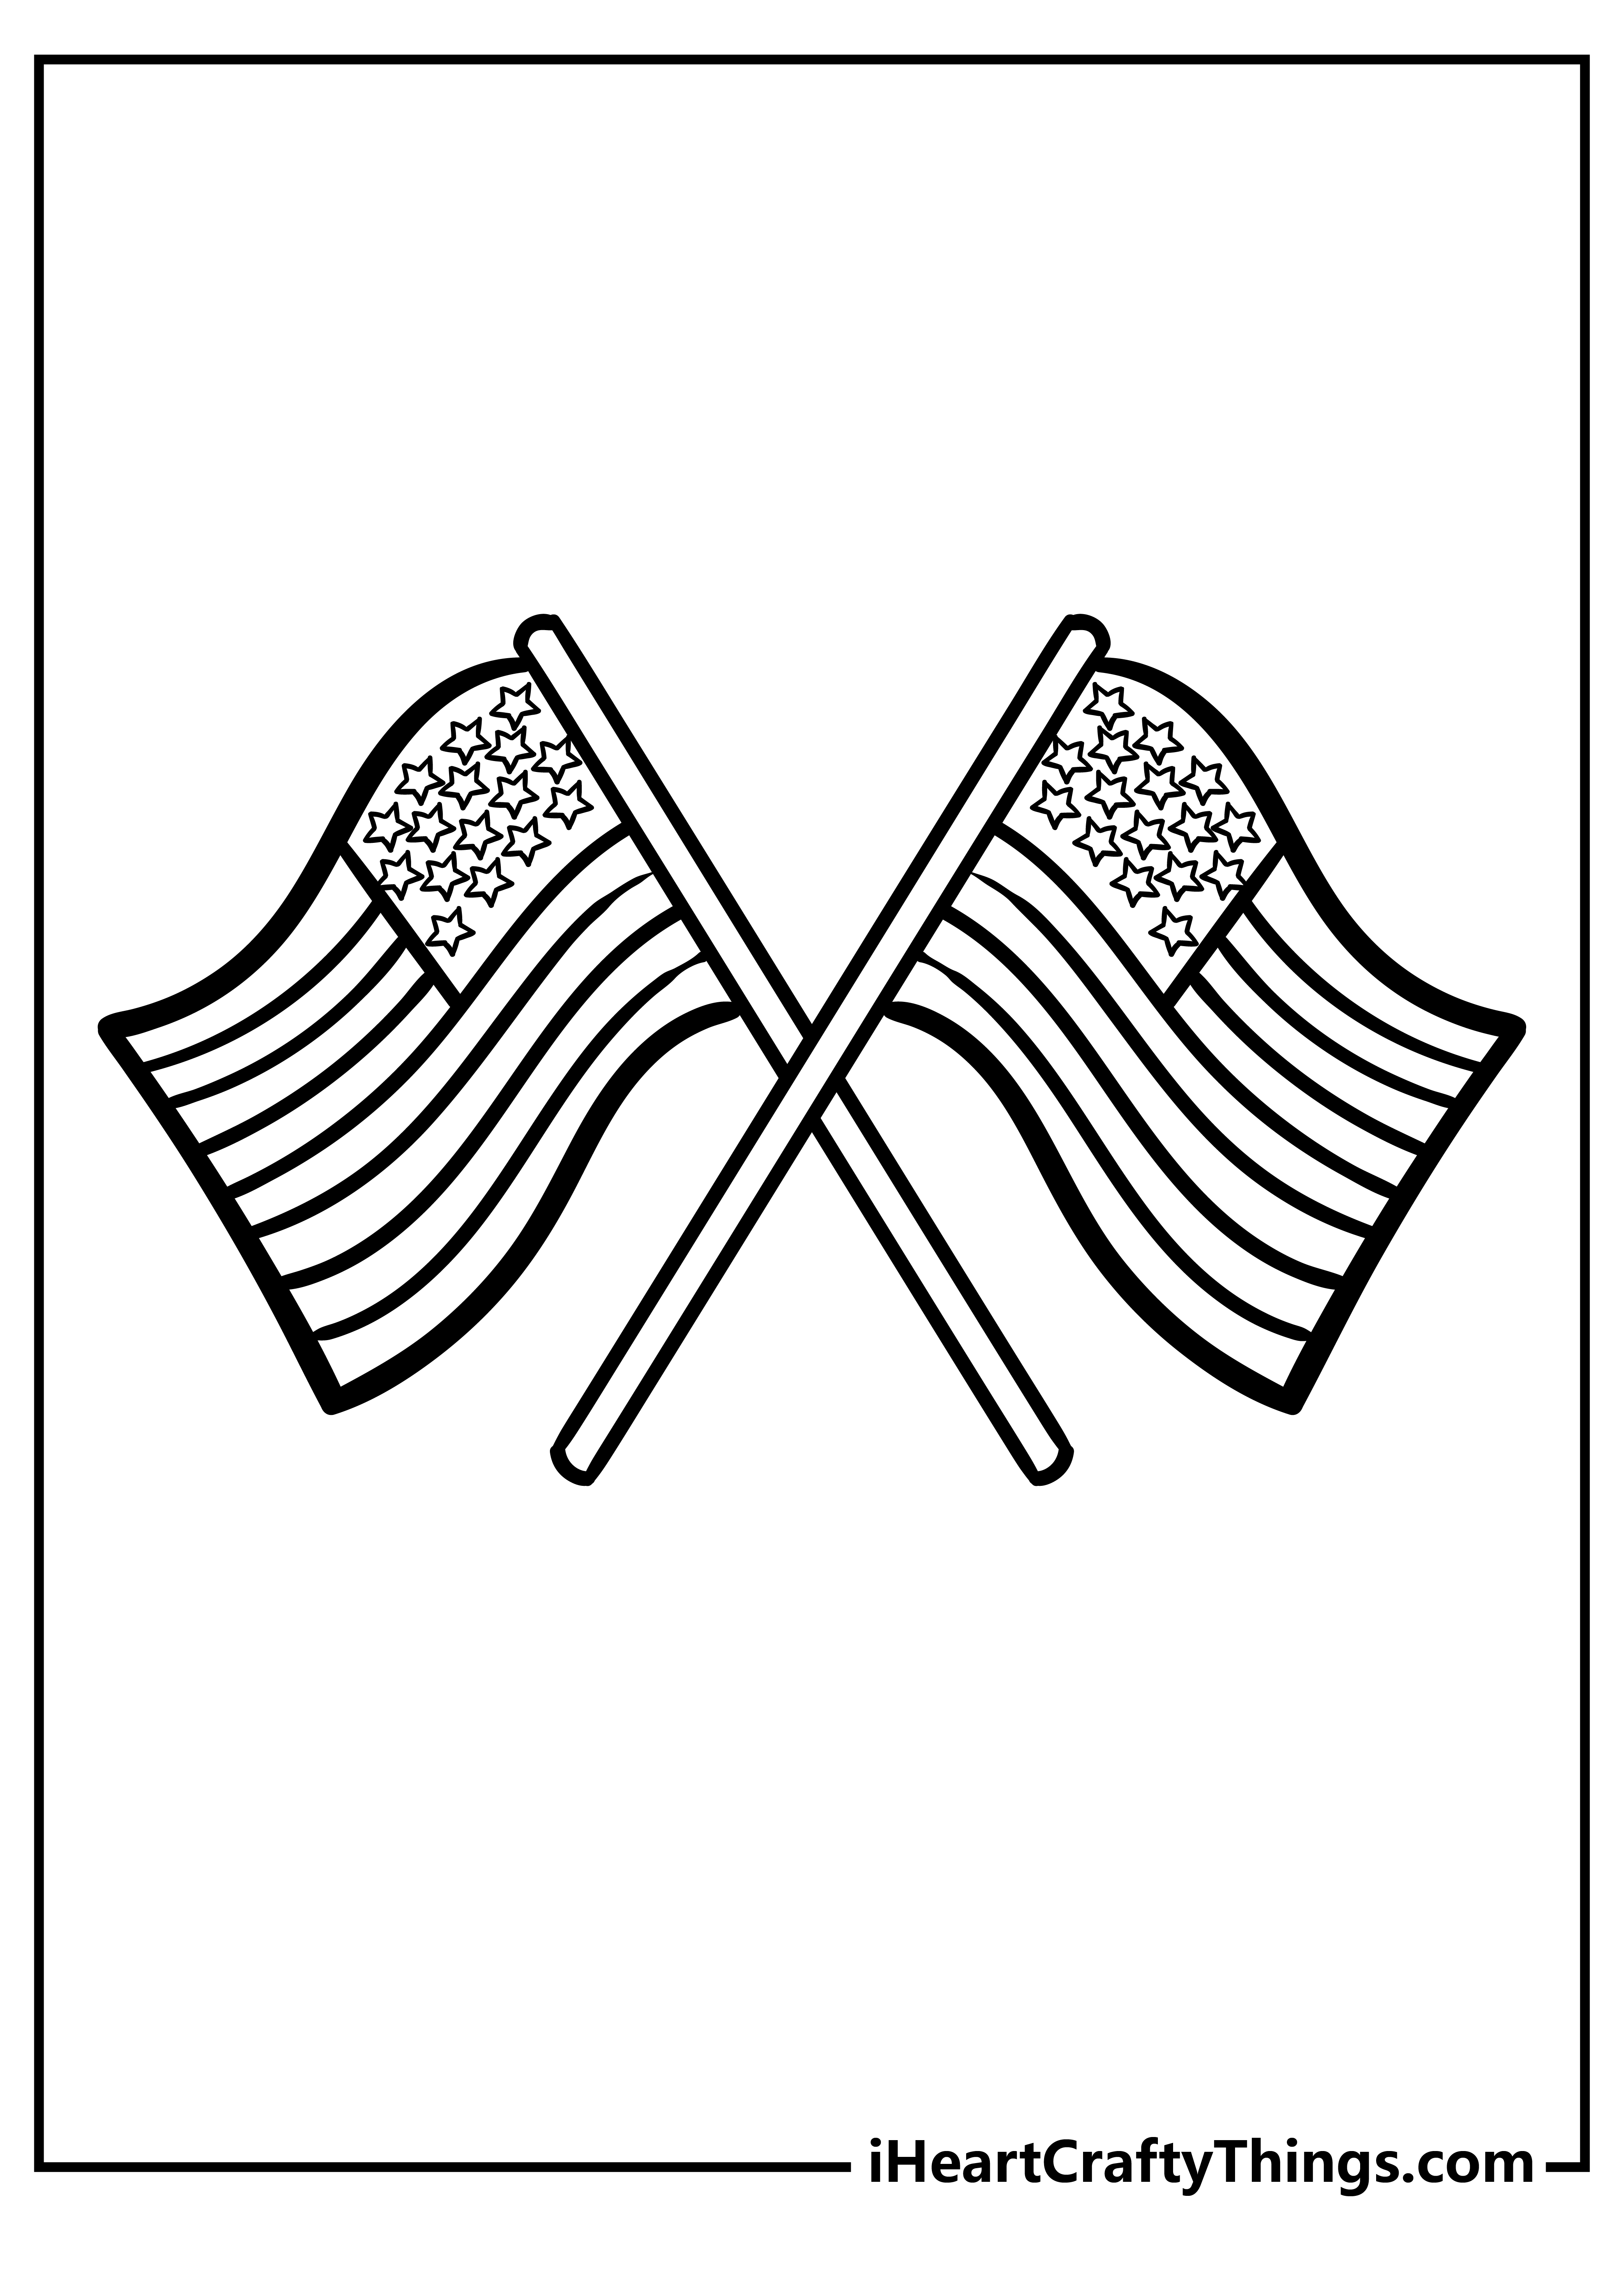 American Flag Coloring Sheet for children free download